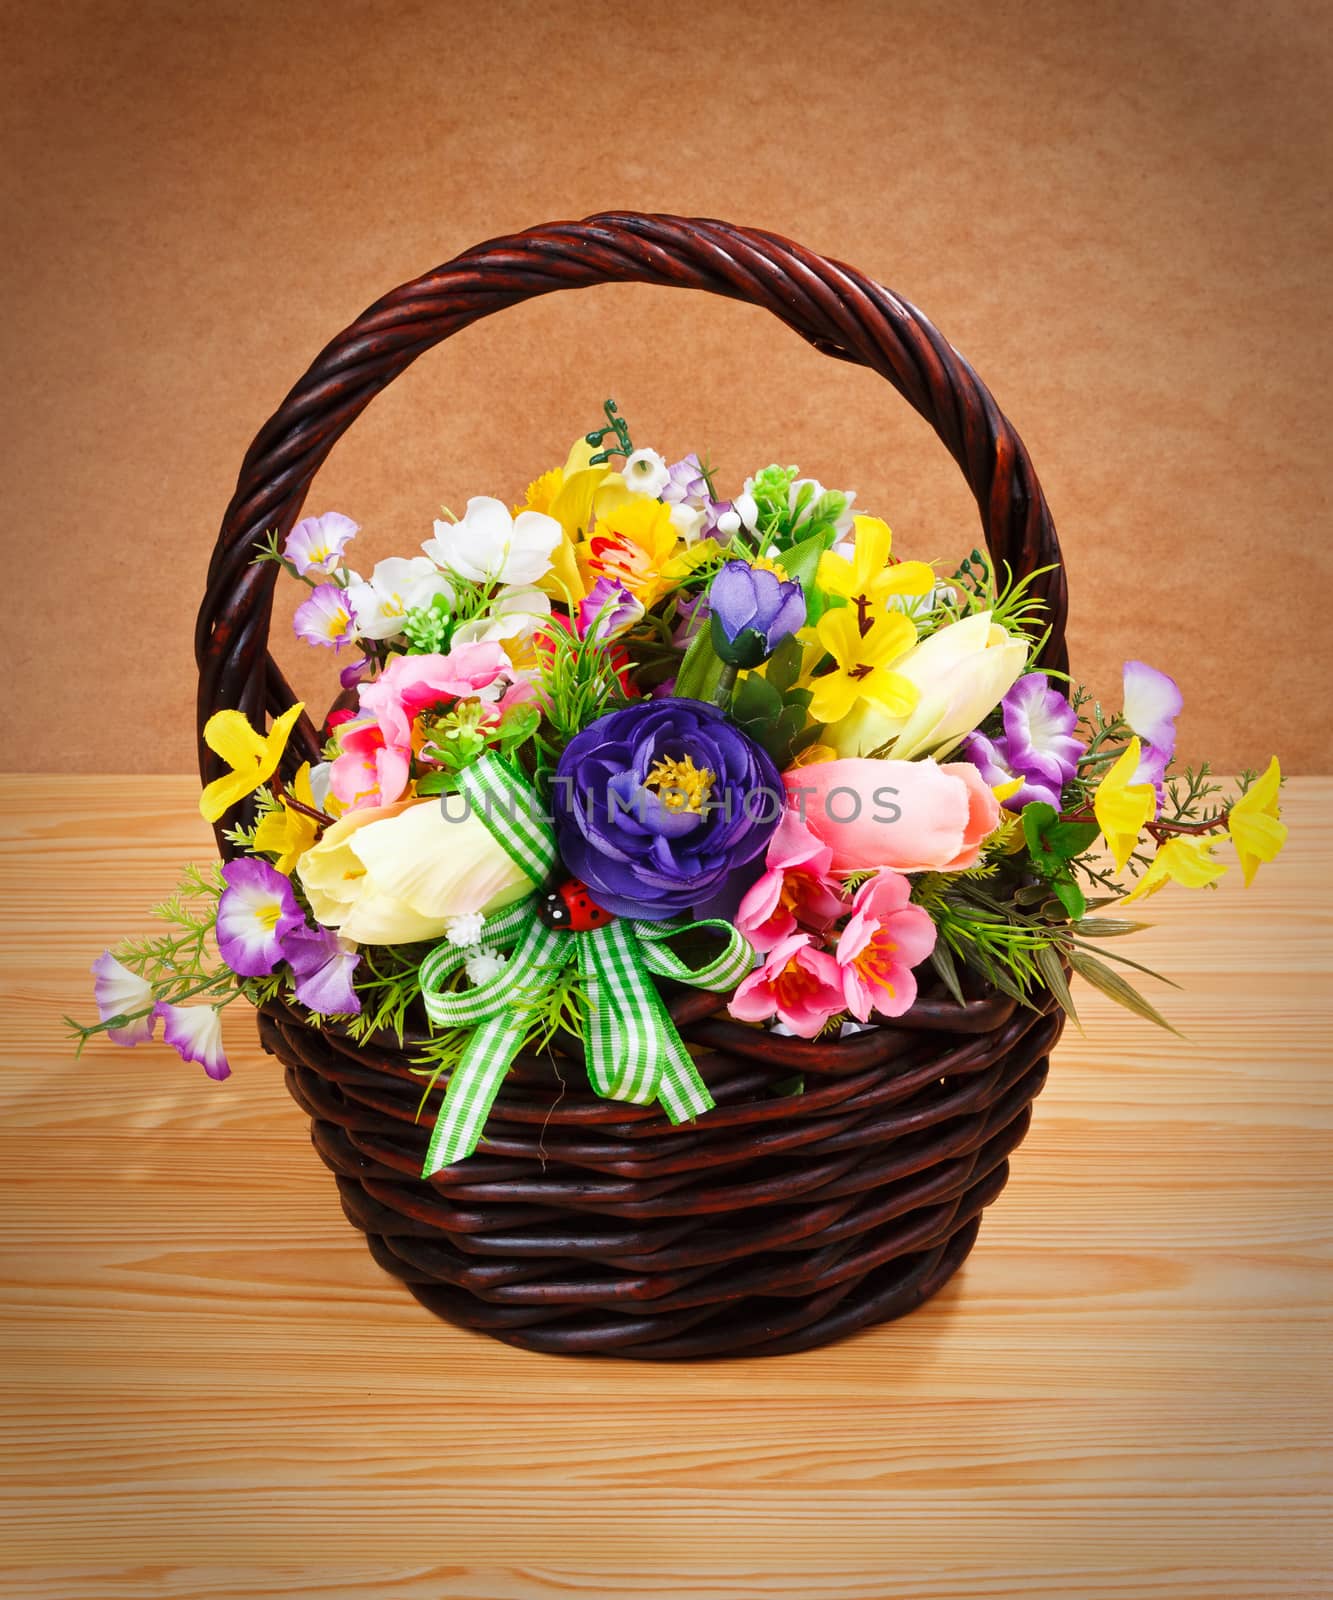 Beautiful flowers in a basket isolated on white